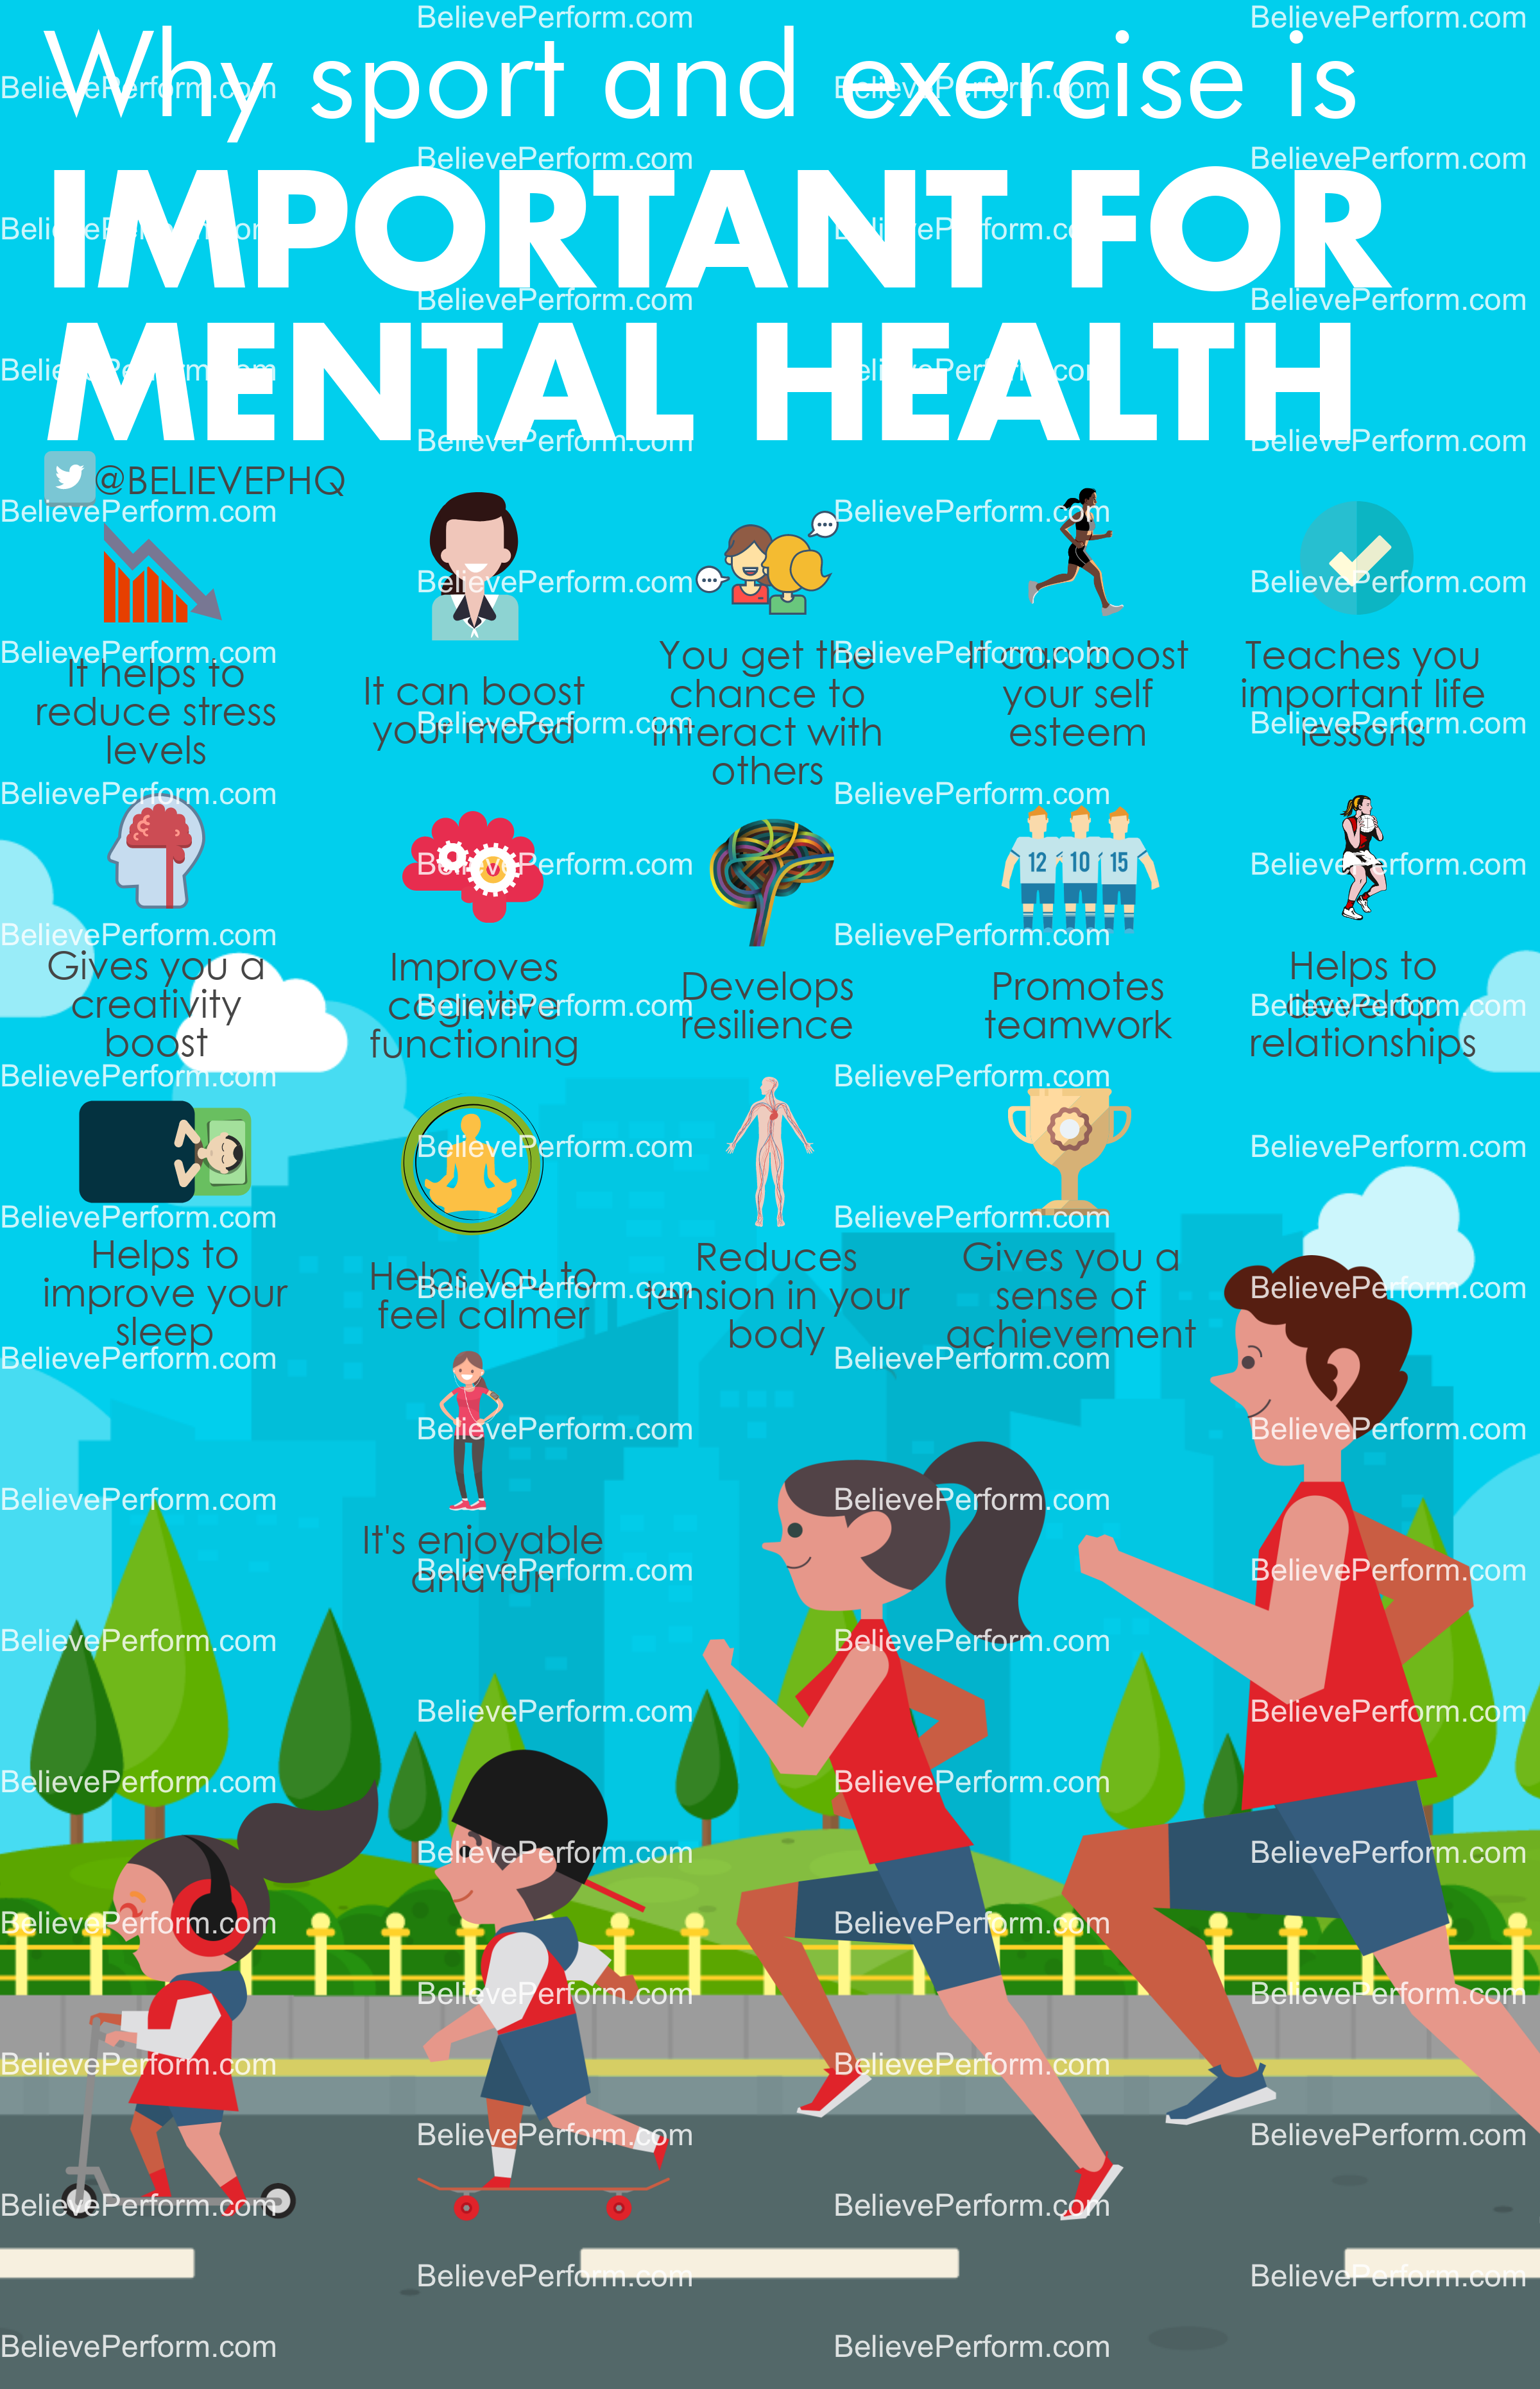 Why sport and exercise is important for children - BelievePerform - The